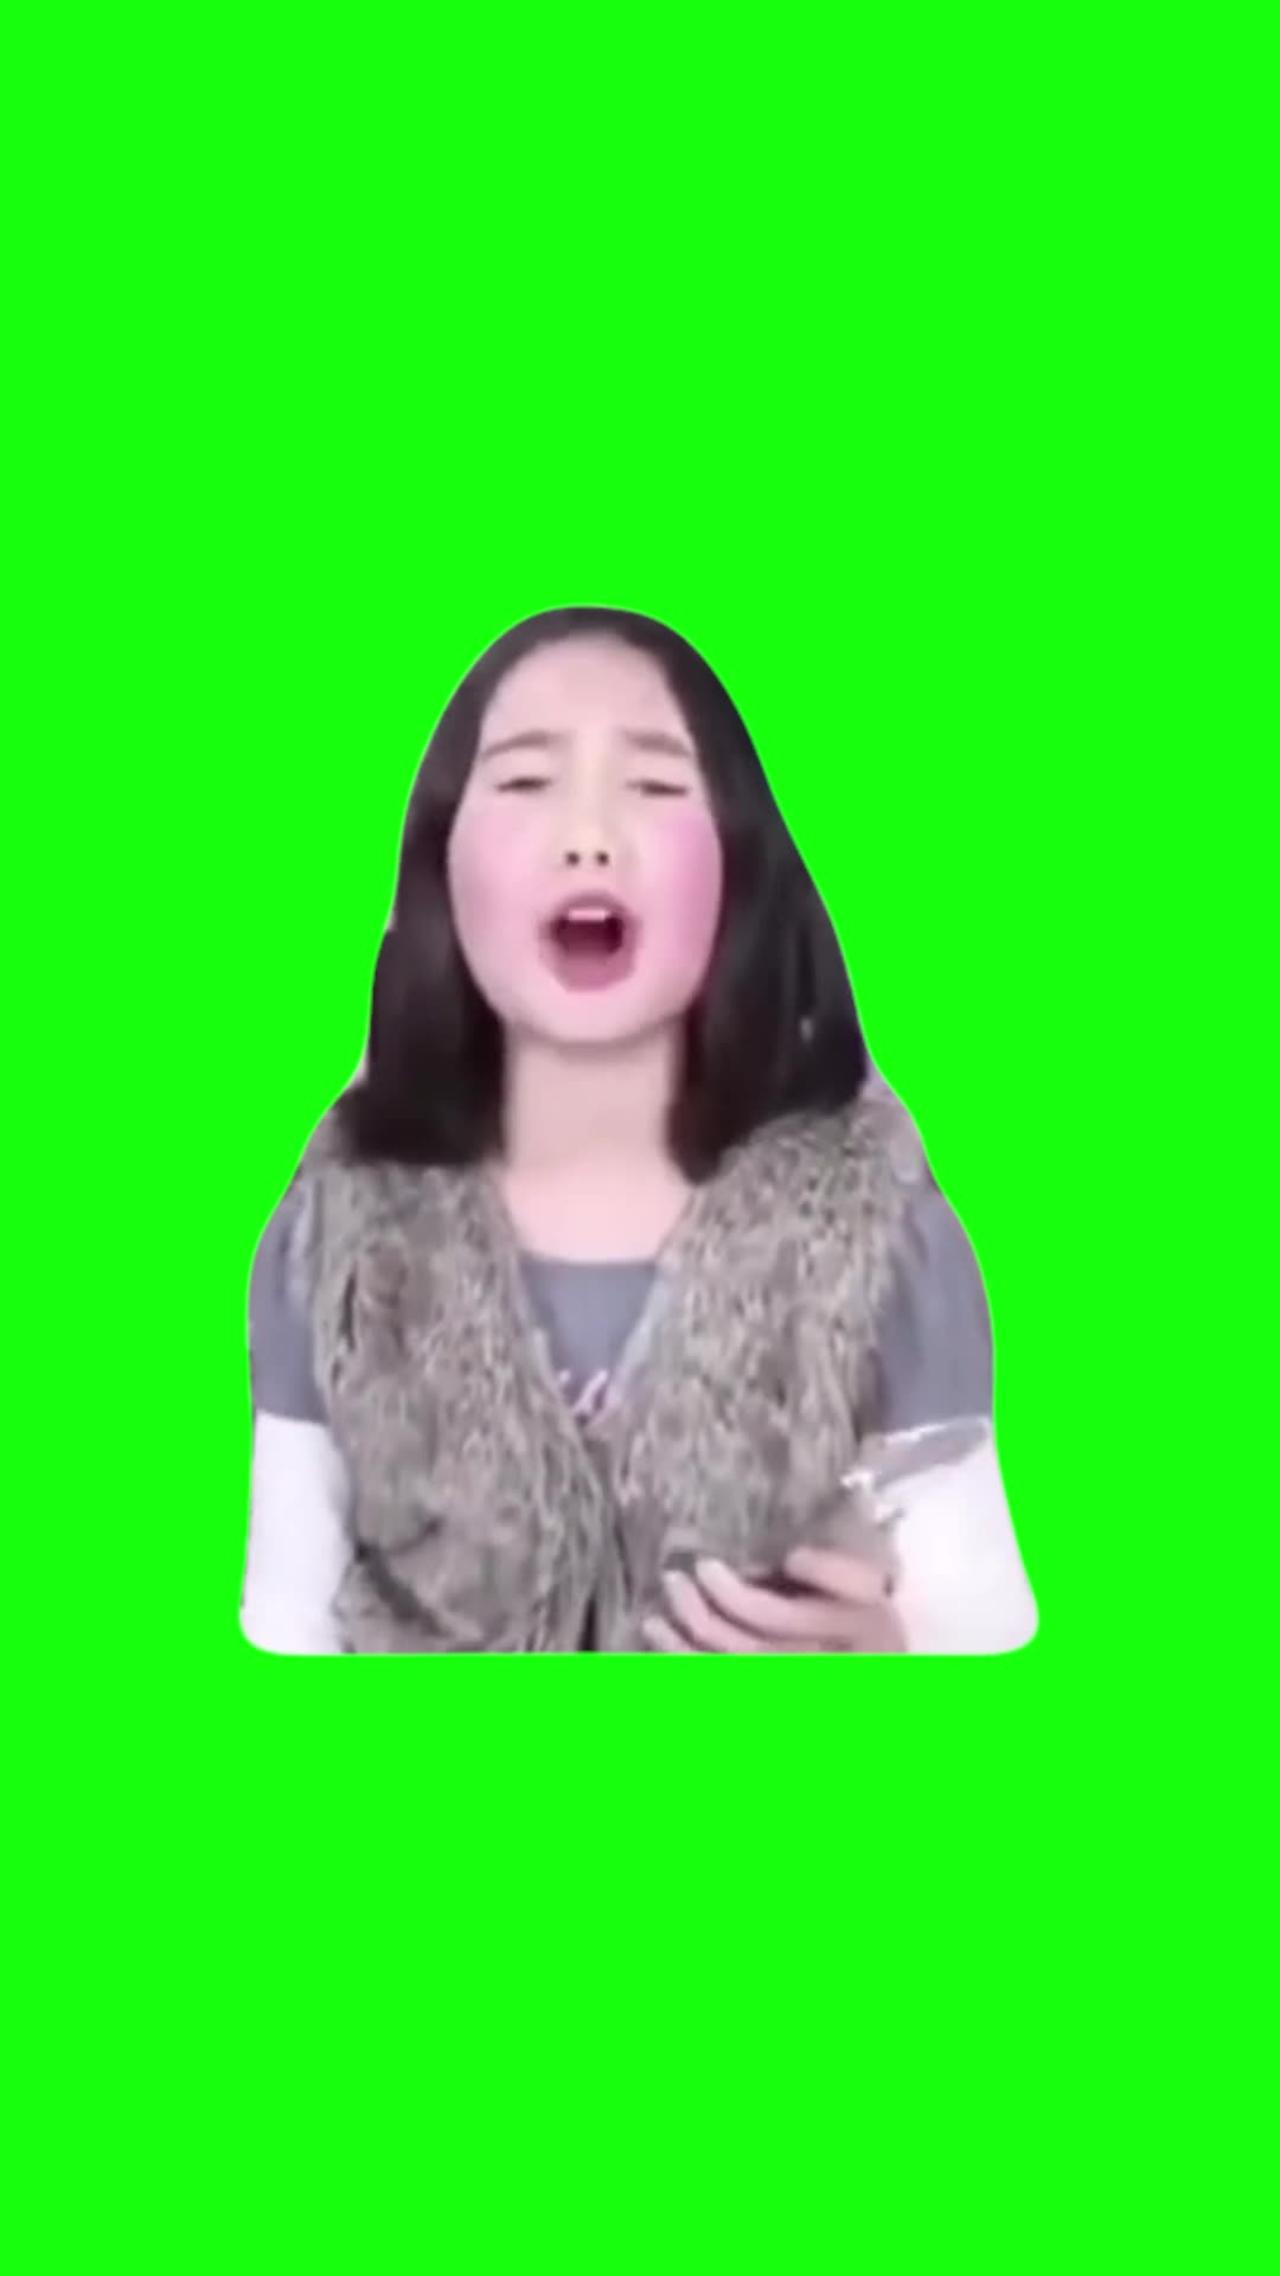 Lil Tay “Mommy Stop, I Was Filming” | Green Screen